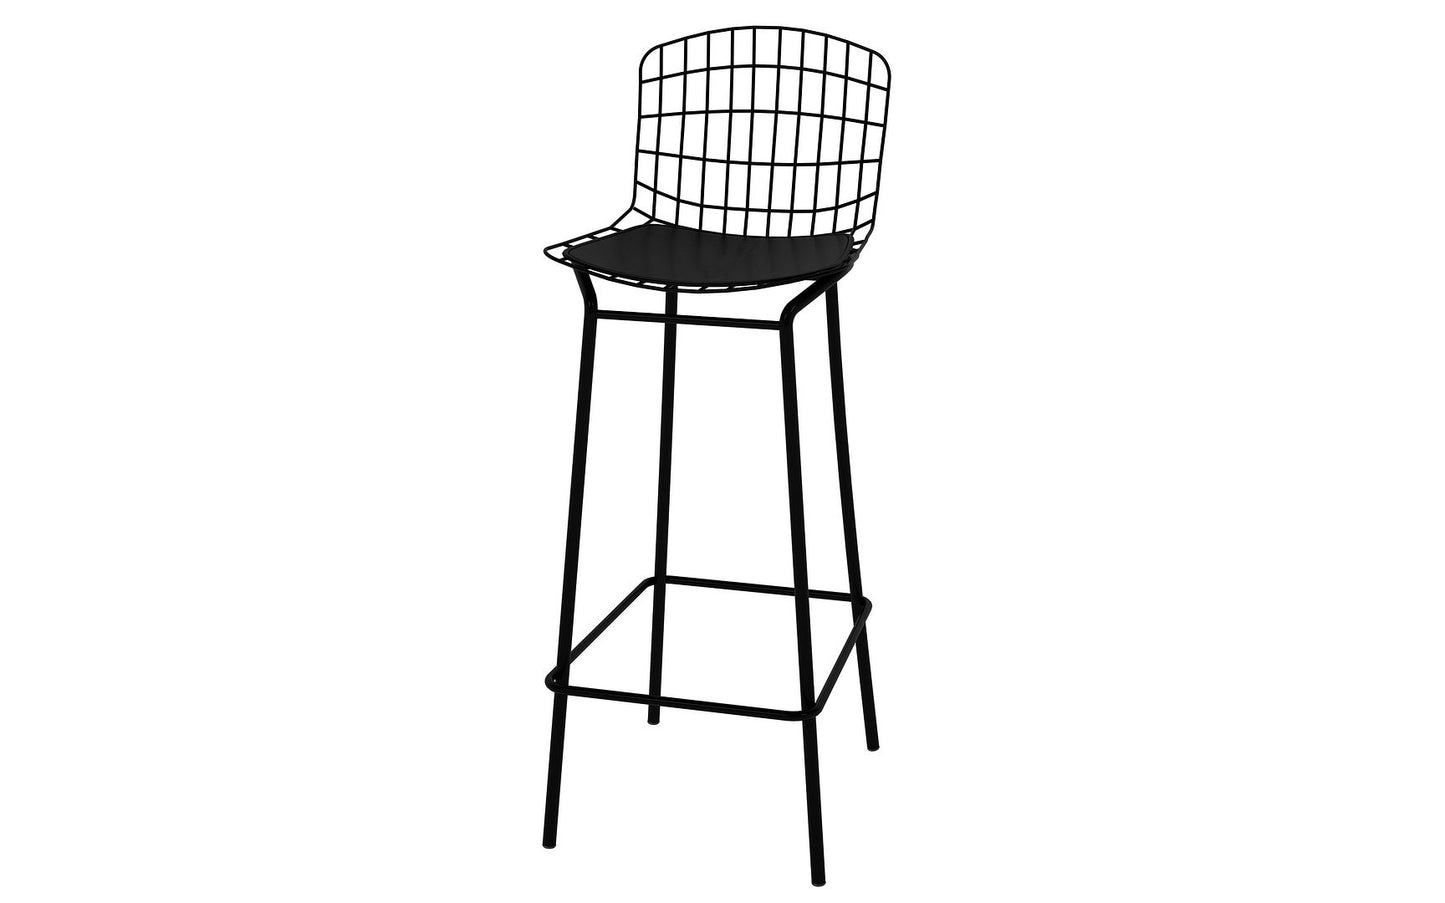 Manhattan Comfort Madeline 41.73" Barstool with Seat Cushion in Black (Set of 3)